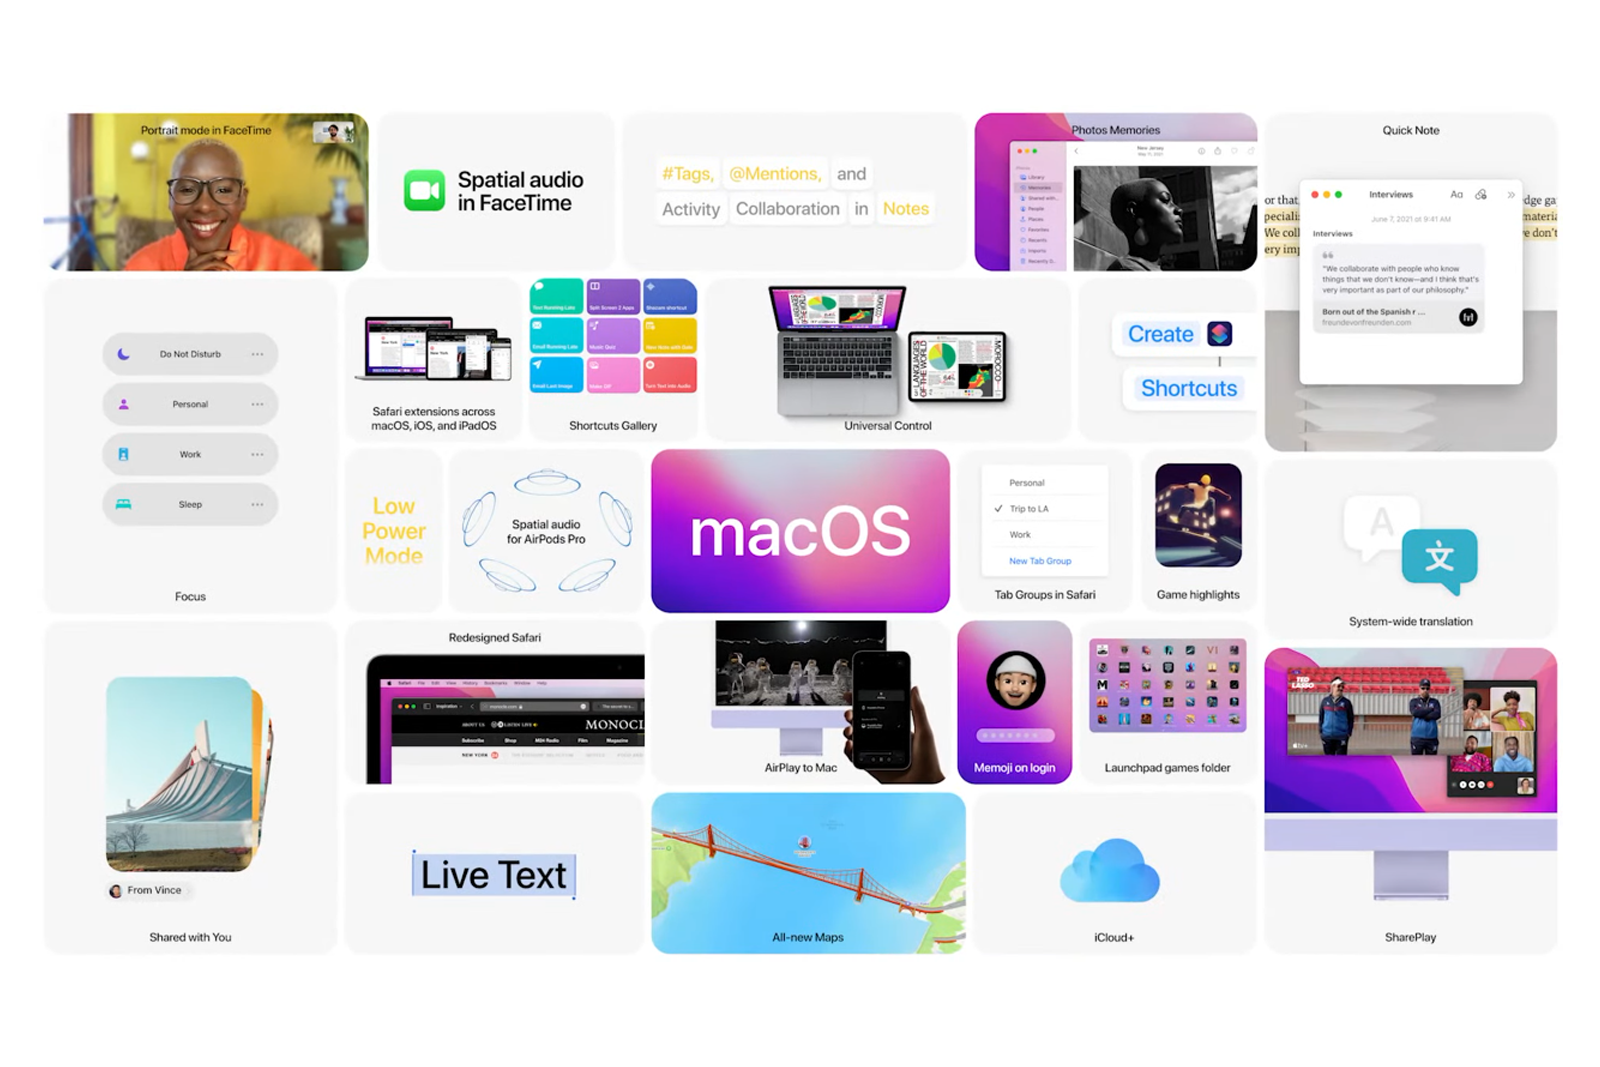 macOS Monterey is coming: New Safari, Shortcuts and Universal Control meaning you can drag files from iPad photo 4